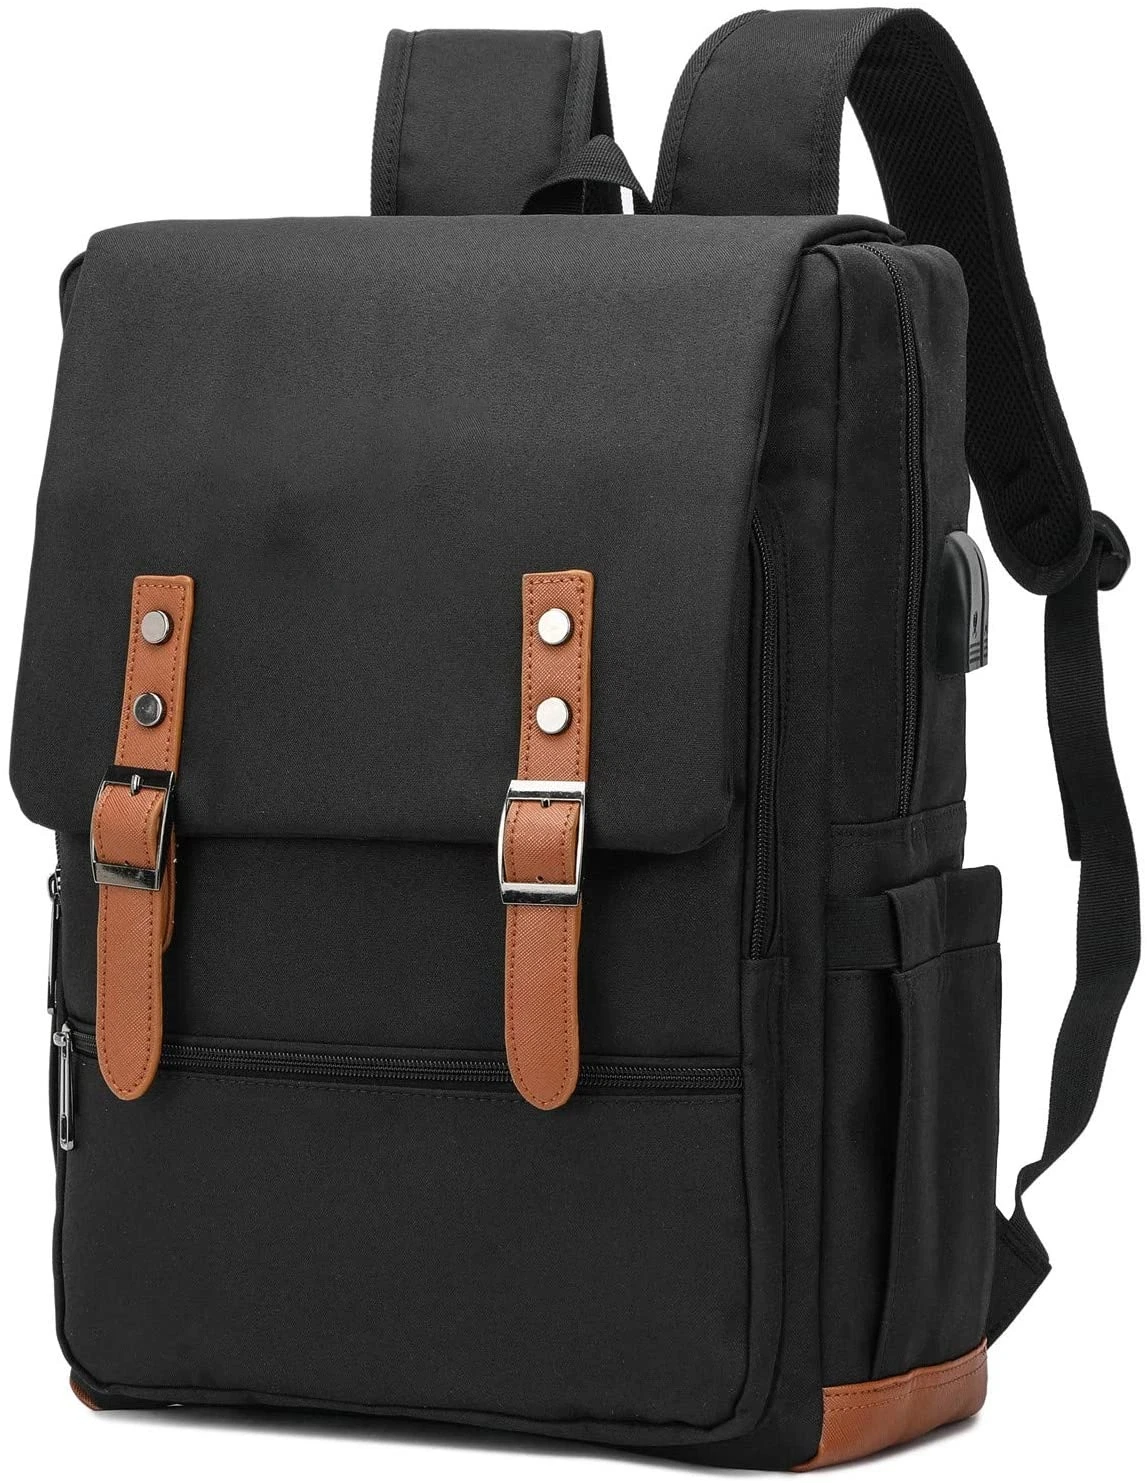 Custom Waterproof USB Travel Back Pack Smart Laptop Backpack Bag with Charger